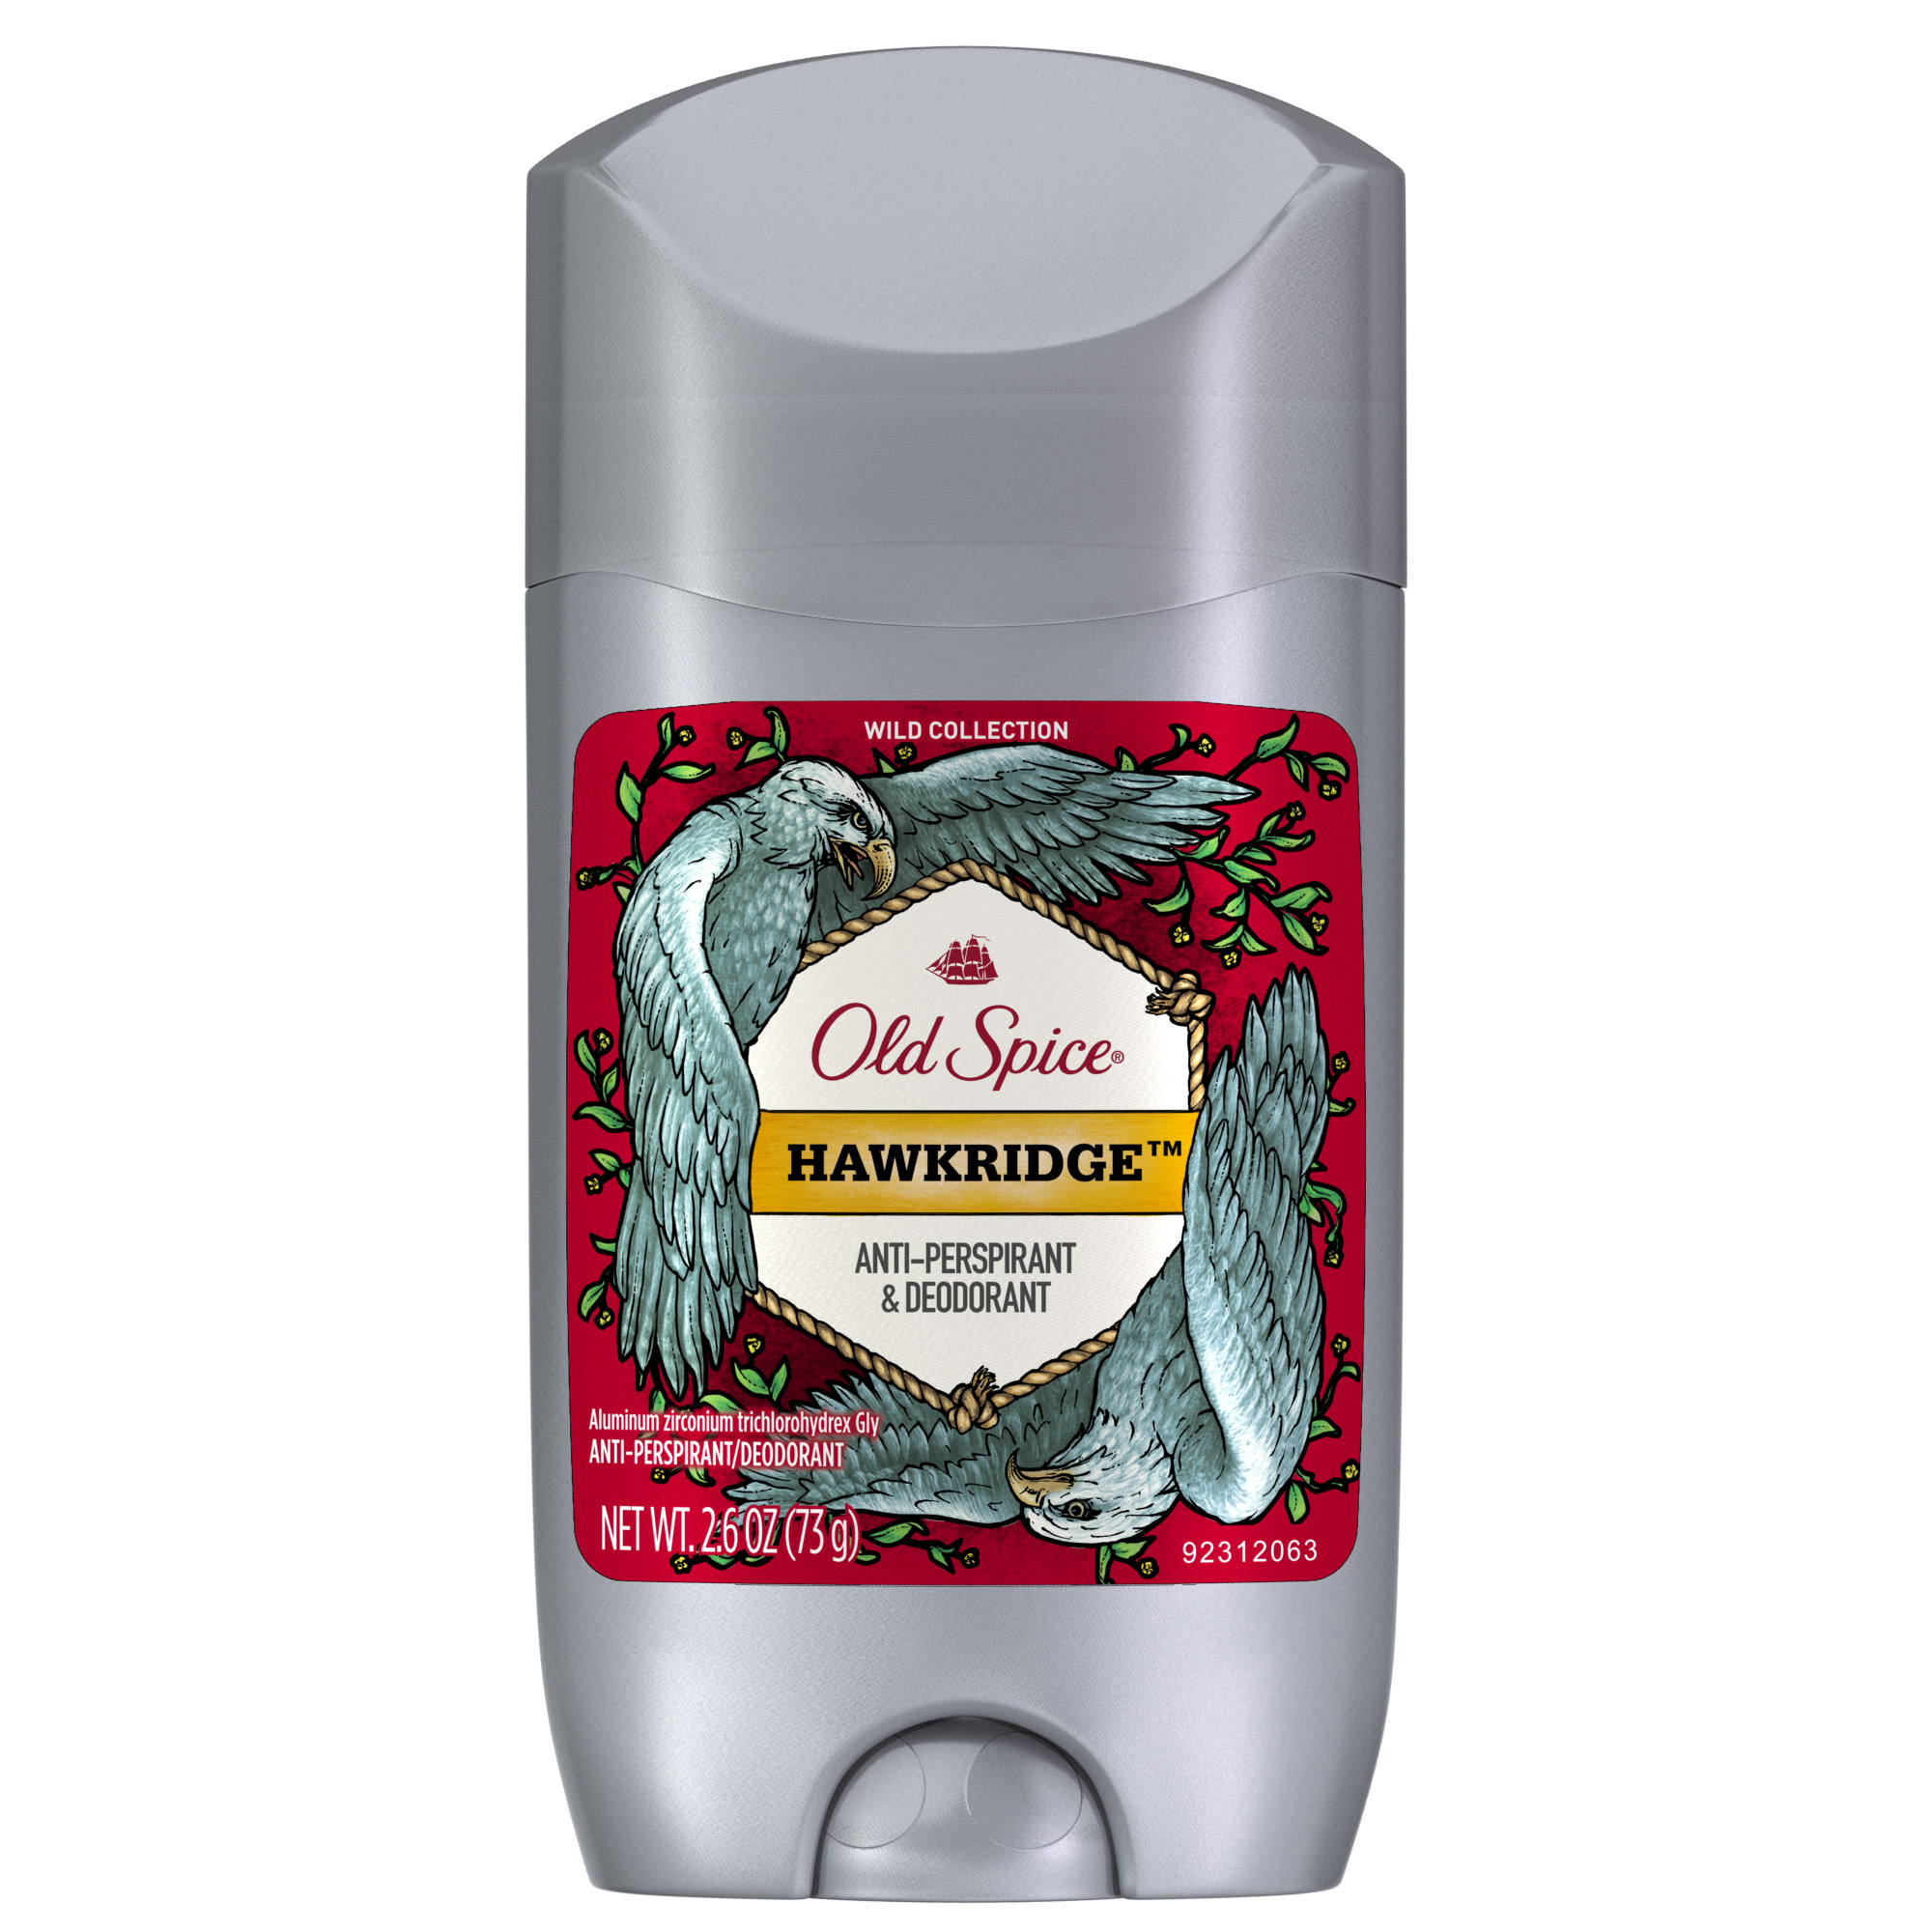 Old Spice Wild Hawkridge Scent Invisible Solid Antiperspirant and Deodorant for Men, 2.6 oz - image 1 of 8